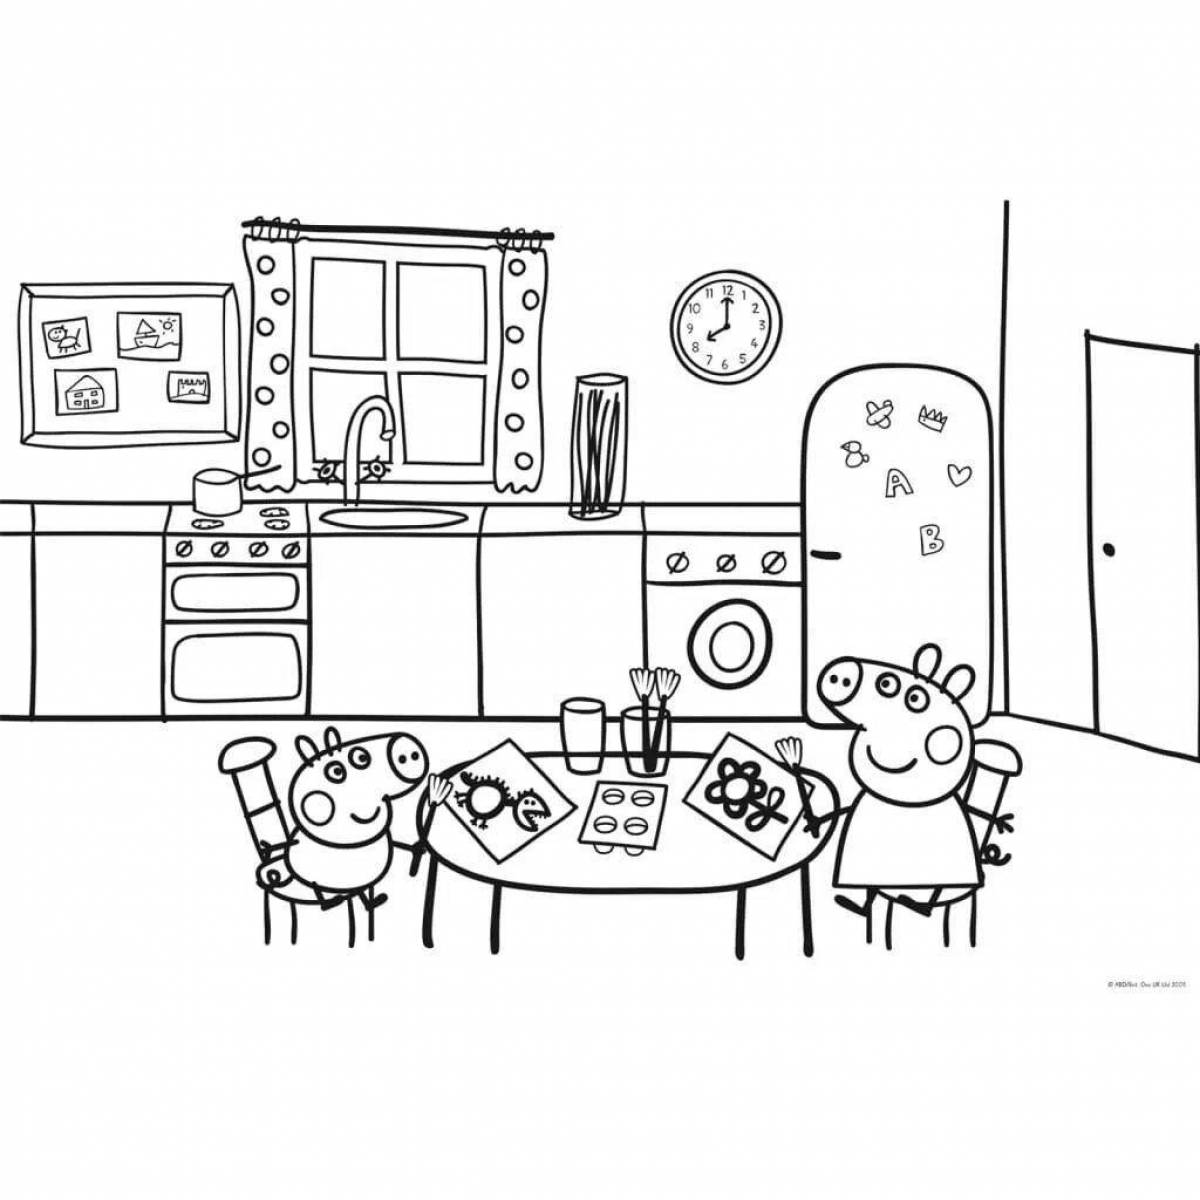 Amazing toka side furniture coloring page